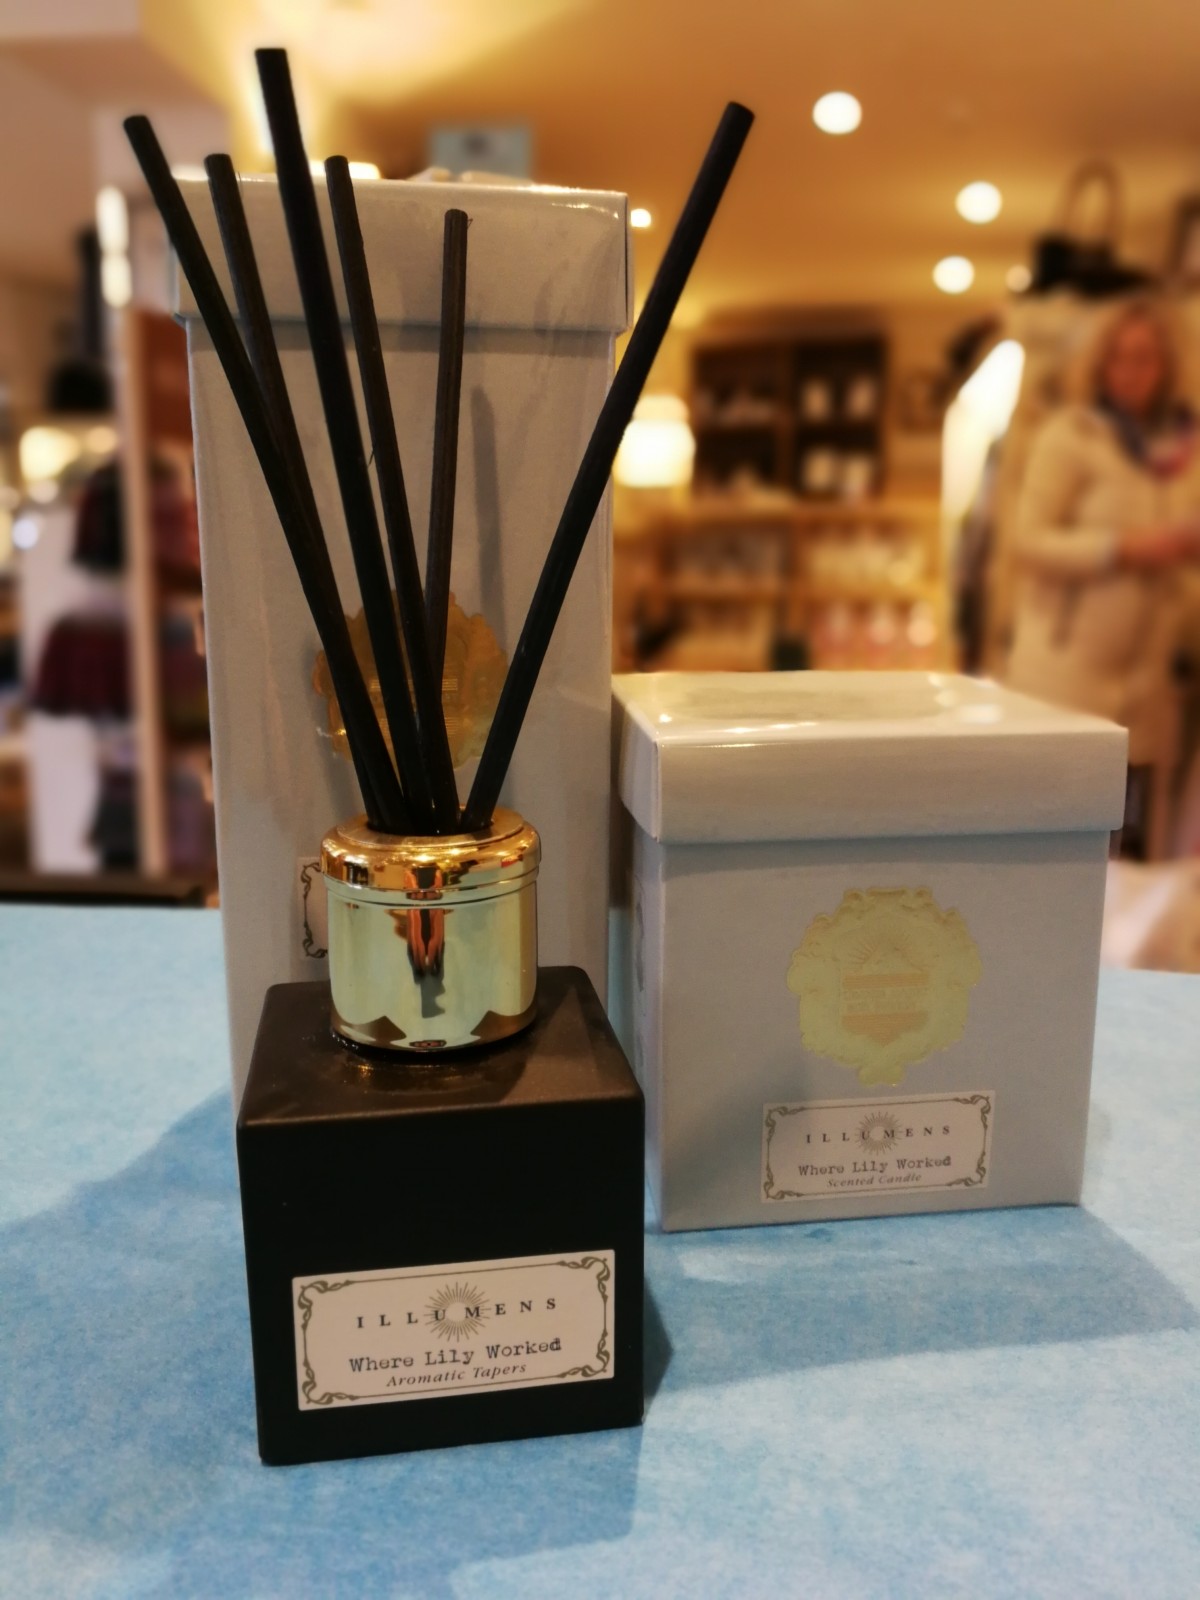 Win a gorgeous  Illumens Reed Diffuser and candle set in their gorgeous scent "Where Lily Worked" from Perth Illustrious Perth boutique "Precious Sparkle". The set is worth £57 and has luxurious packaging.